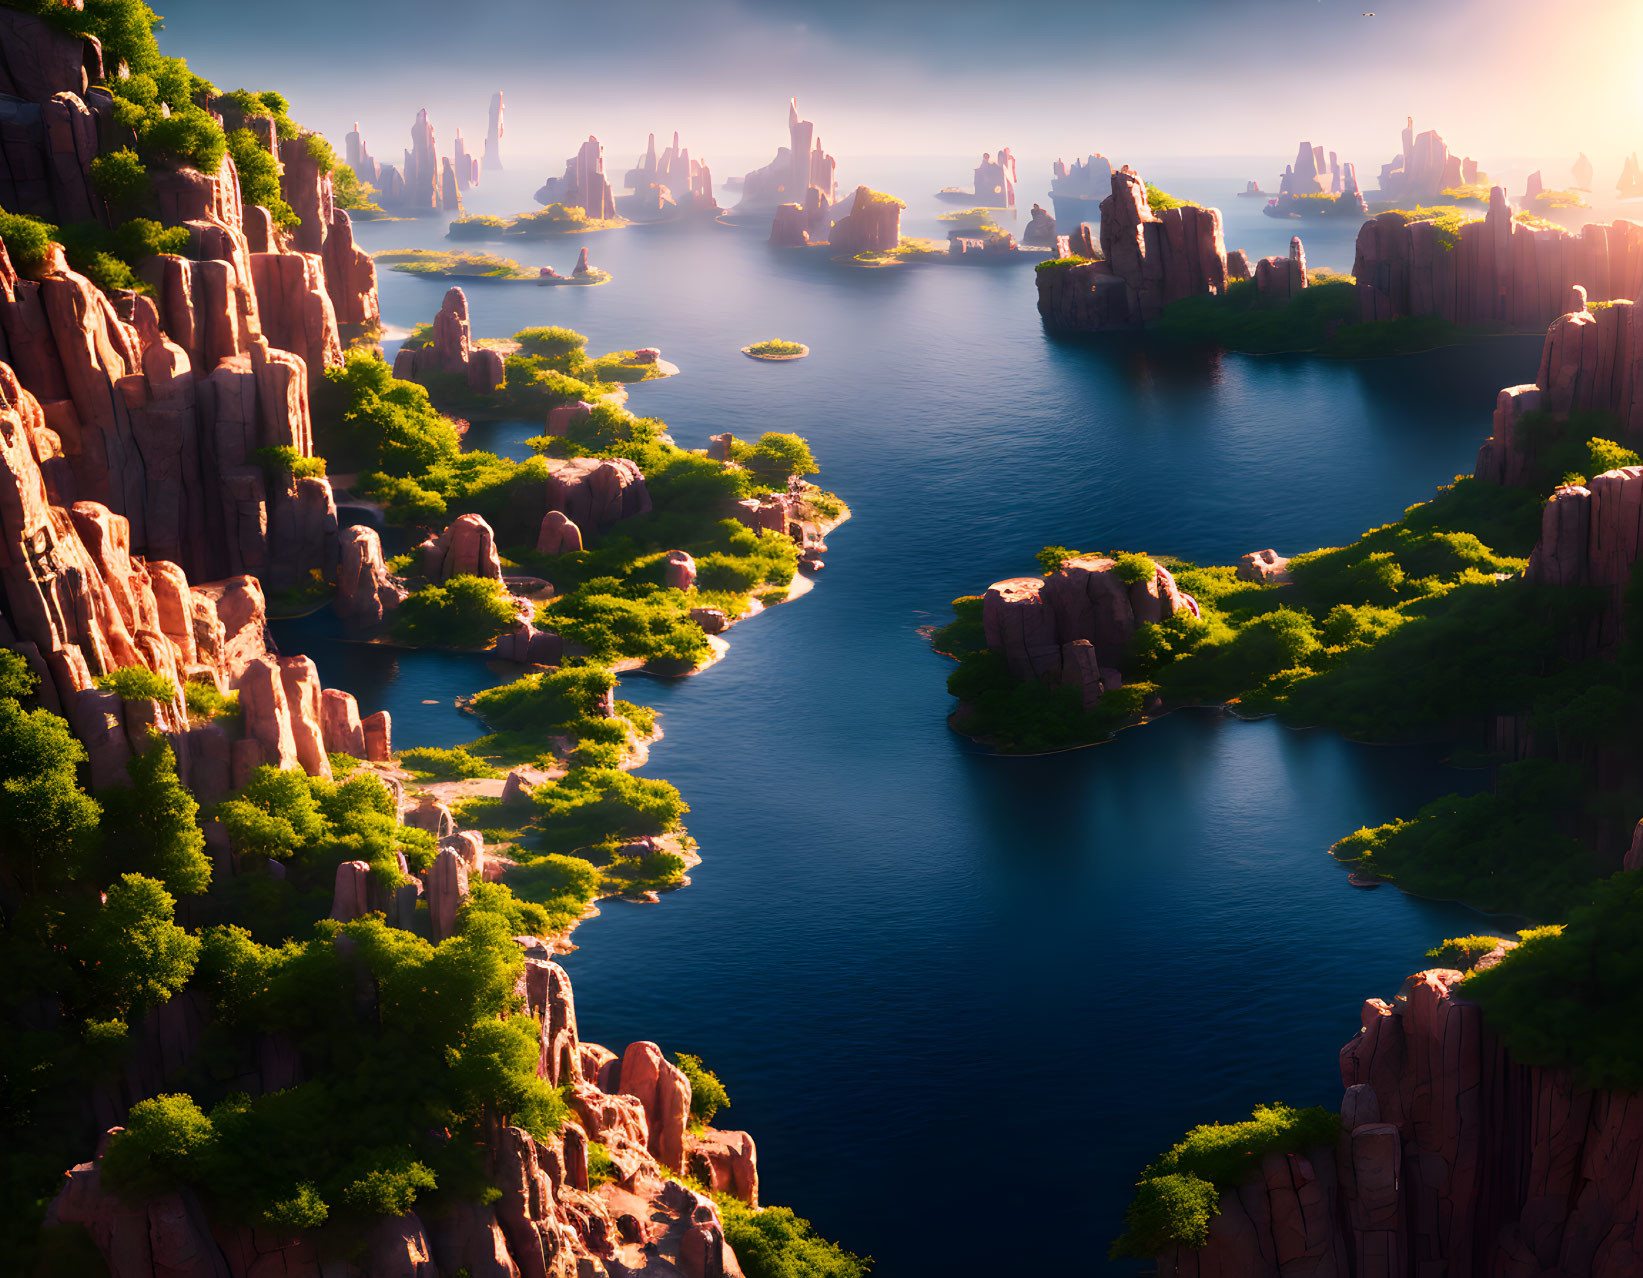 Tranquil river in fantastical landscape with towering rock formations